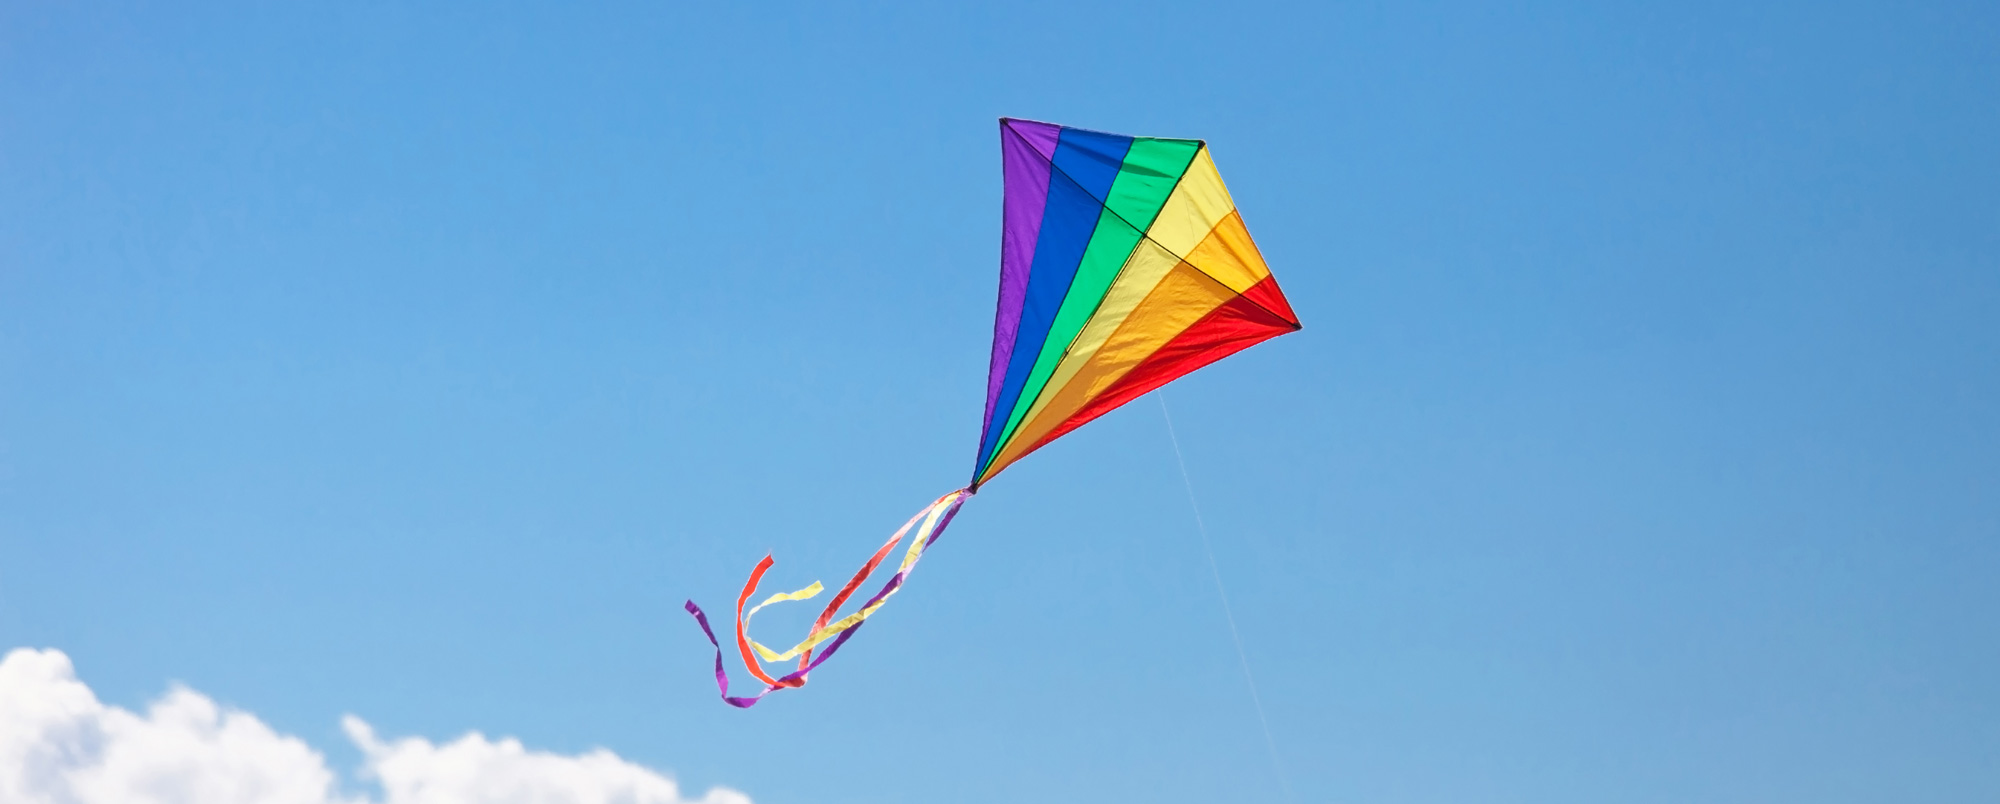 The joy of flying a kite should not turn into the misfortune of birds and other creatures